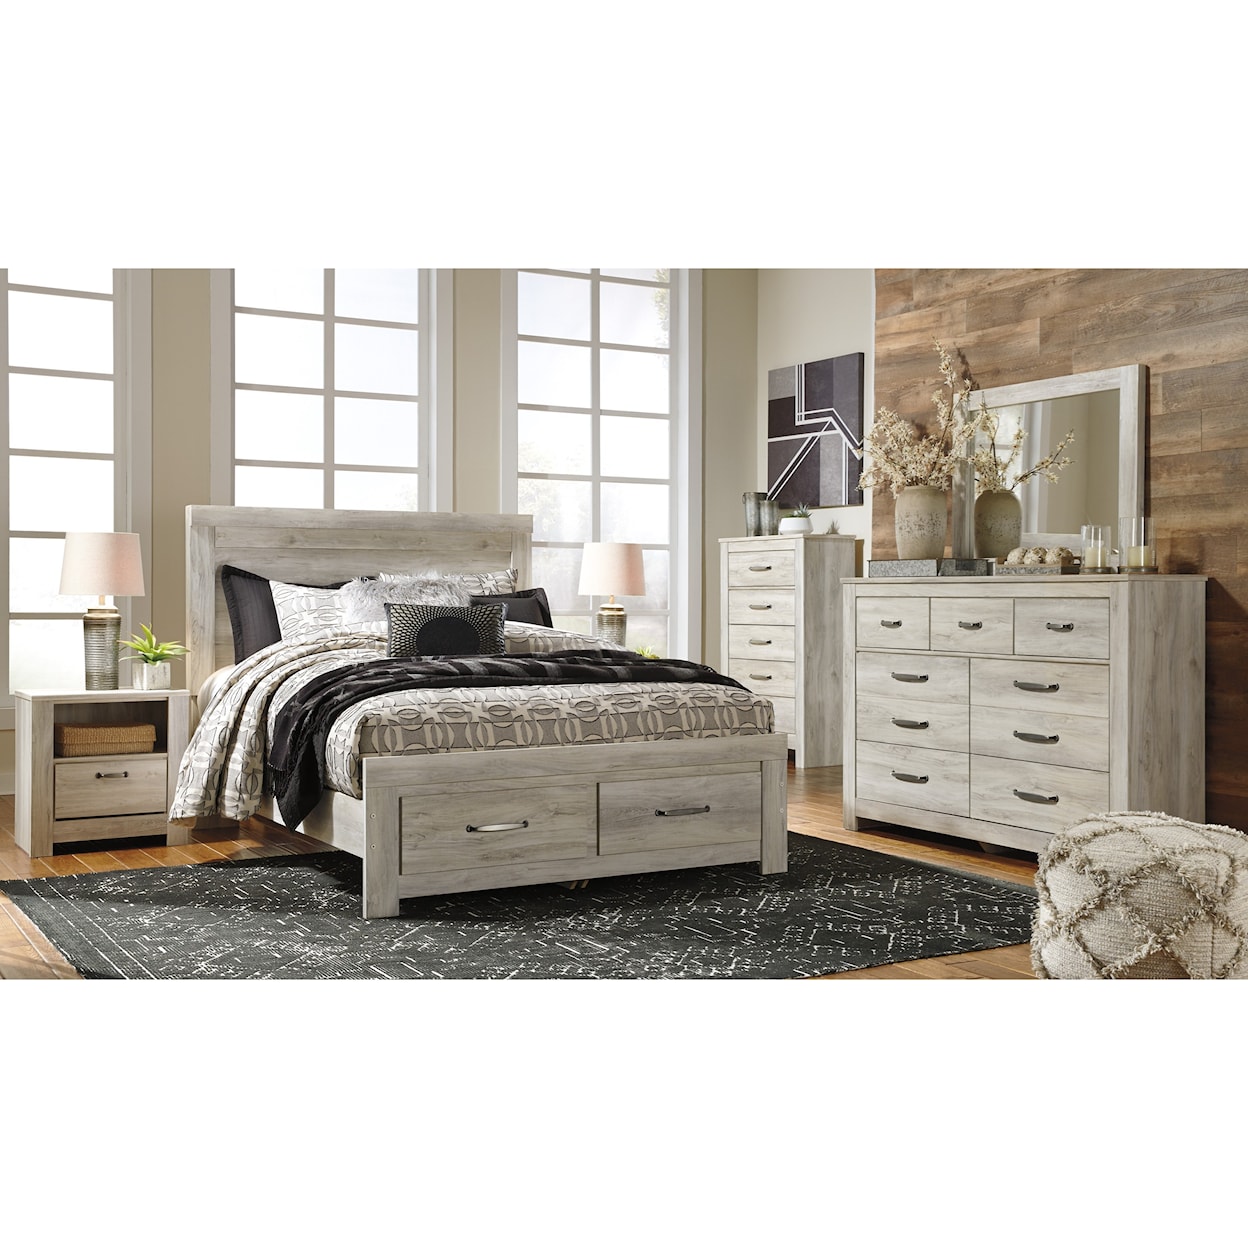 Signature Design by Ashley Bellaby Queen Bedroom Group